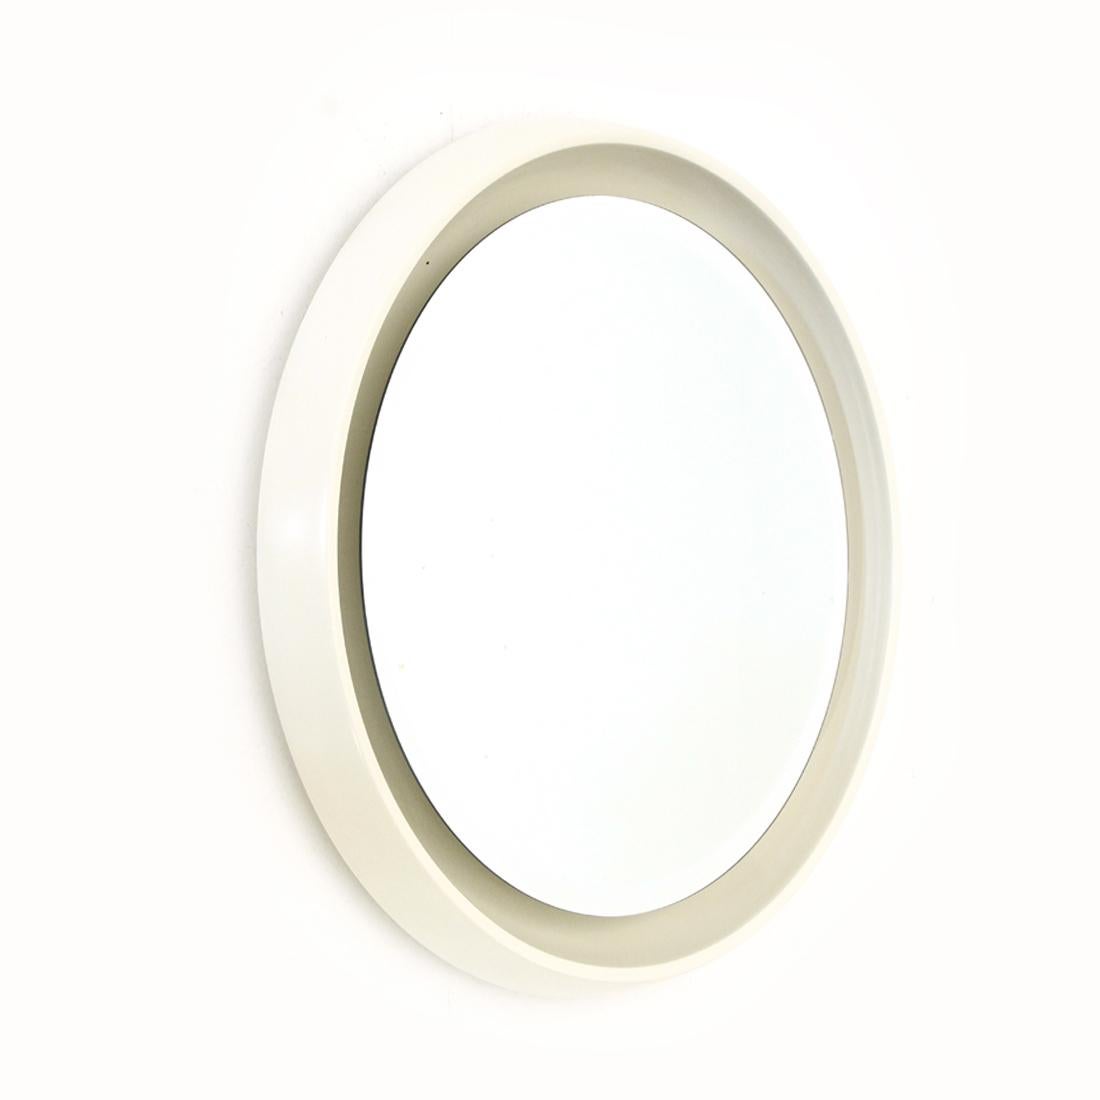 Mirror of Italian manufacture produced in the 1960s by CRB.
Structure and frame in white lacquered wood.
Round mirror with beveled edge.
Illumination with circular neon.
Good general condition, some signs due to normal use over